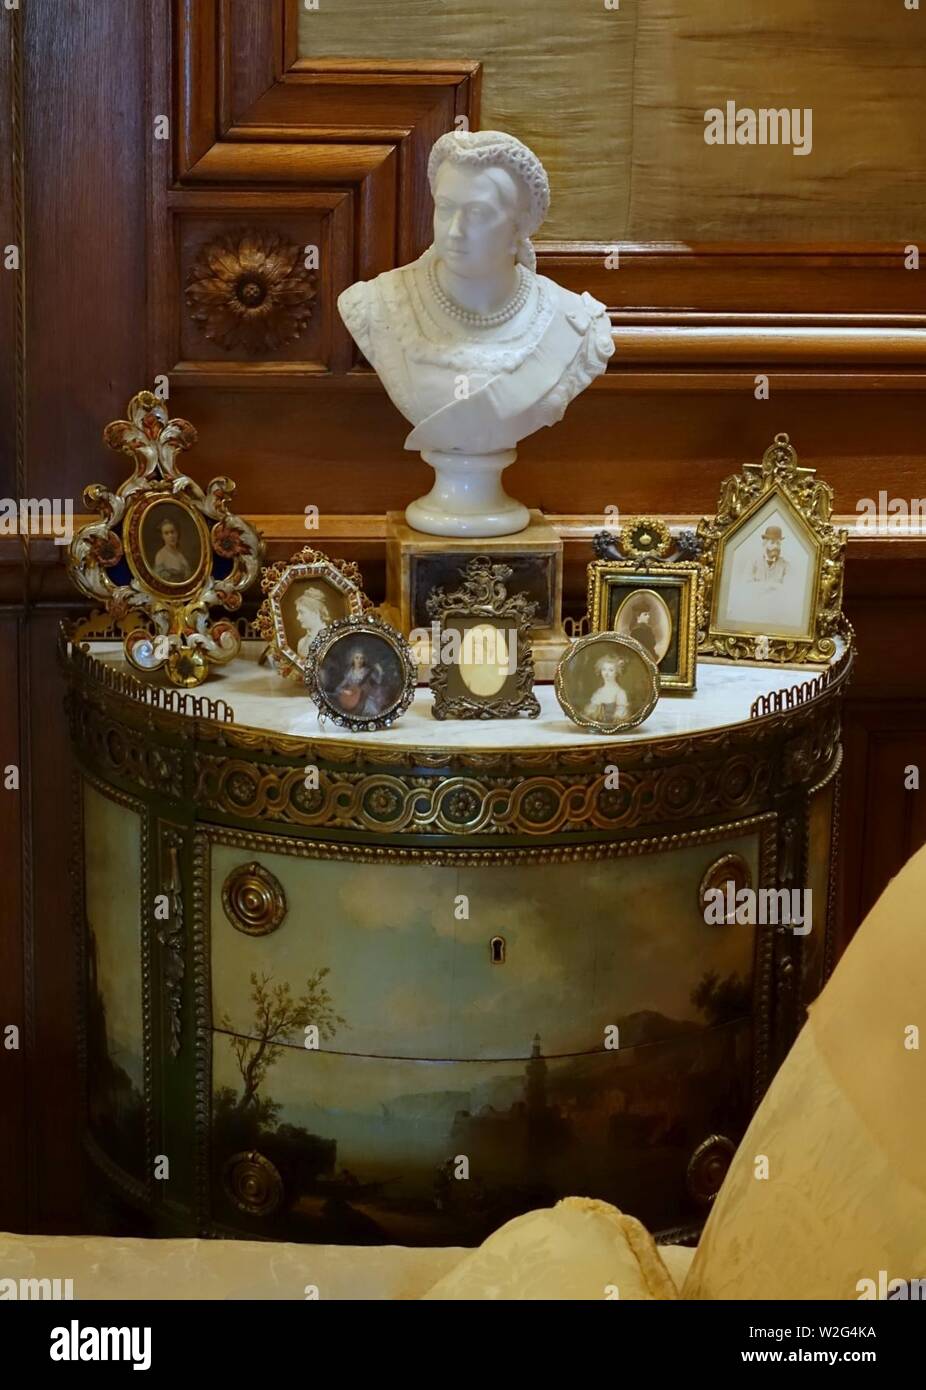 Chest of drawers, attributed to René Dubois, France, 1770-1775, with bust of Queen Victoria by Joseph Edgar Boehm, c. 1870 - Waddesdon Manor - Buckinghamshire, England - Stock Photo